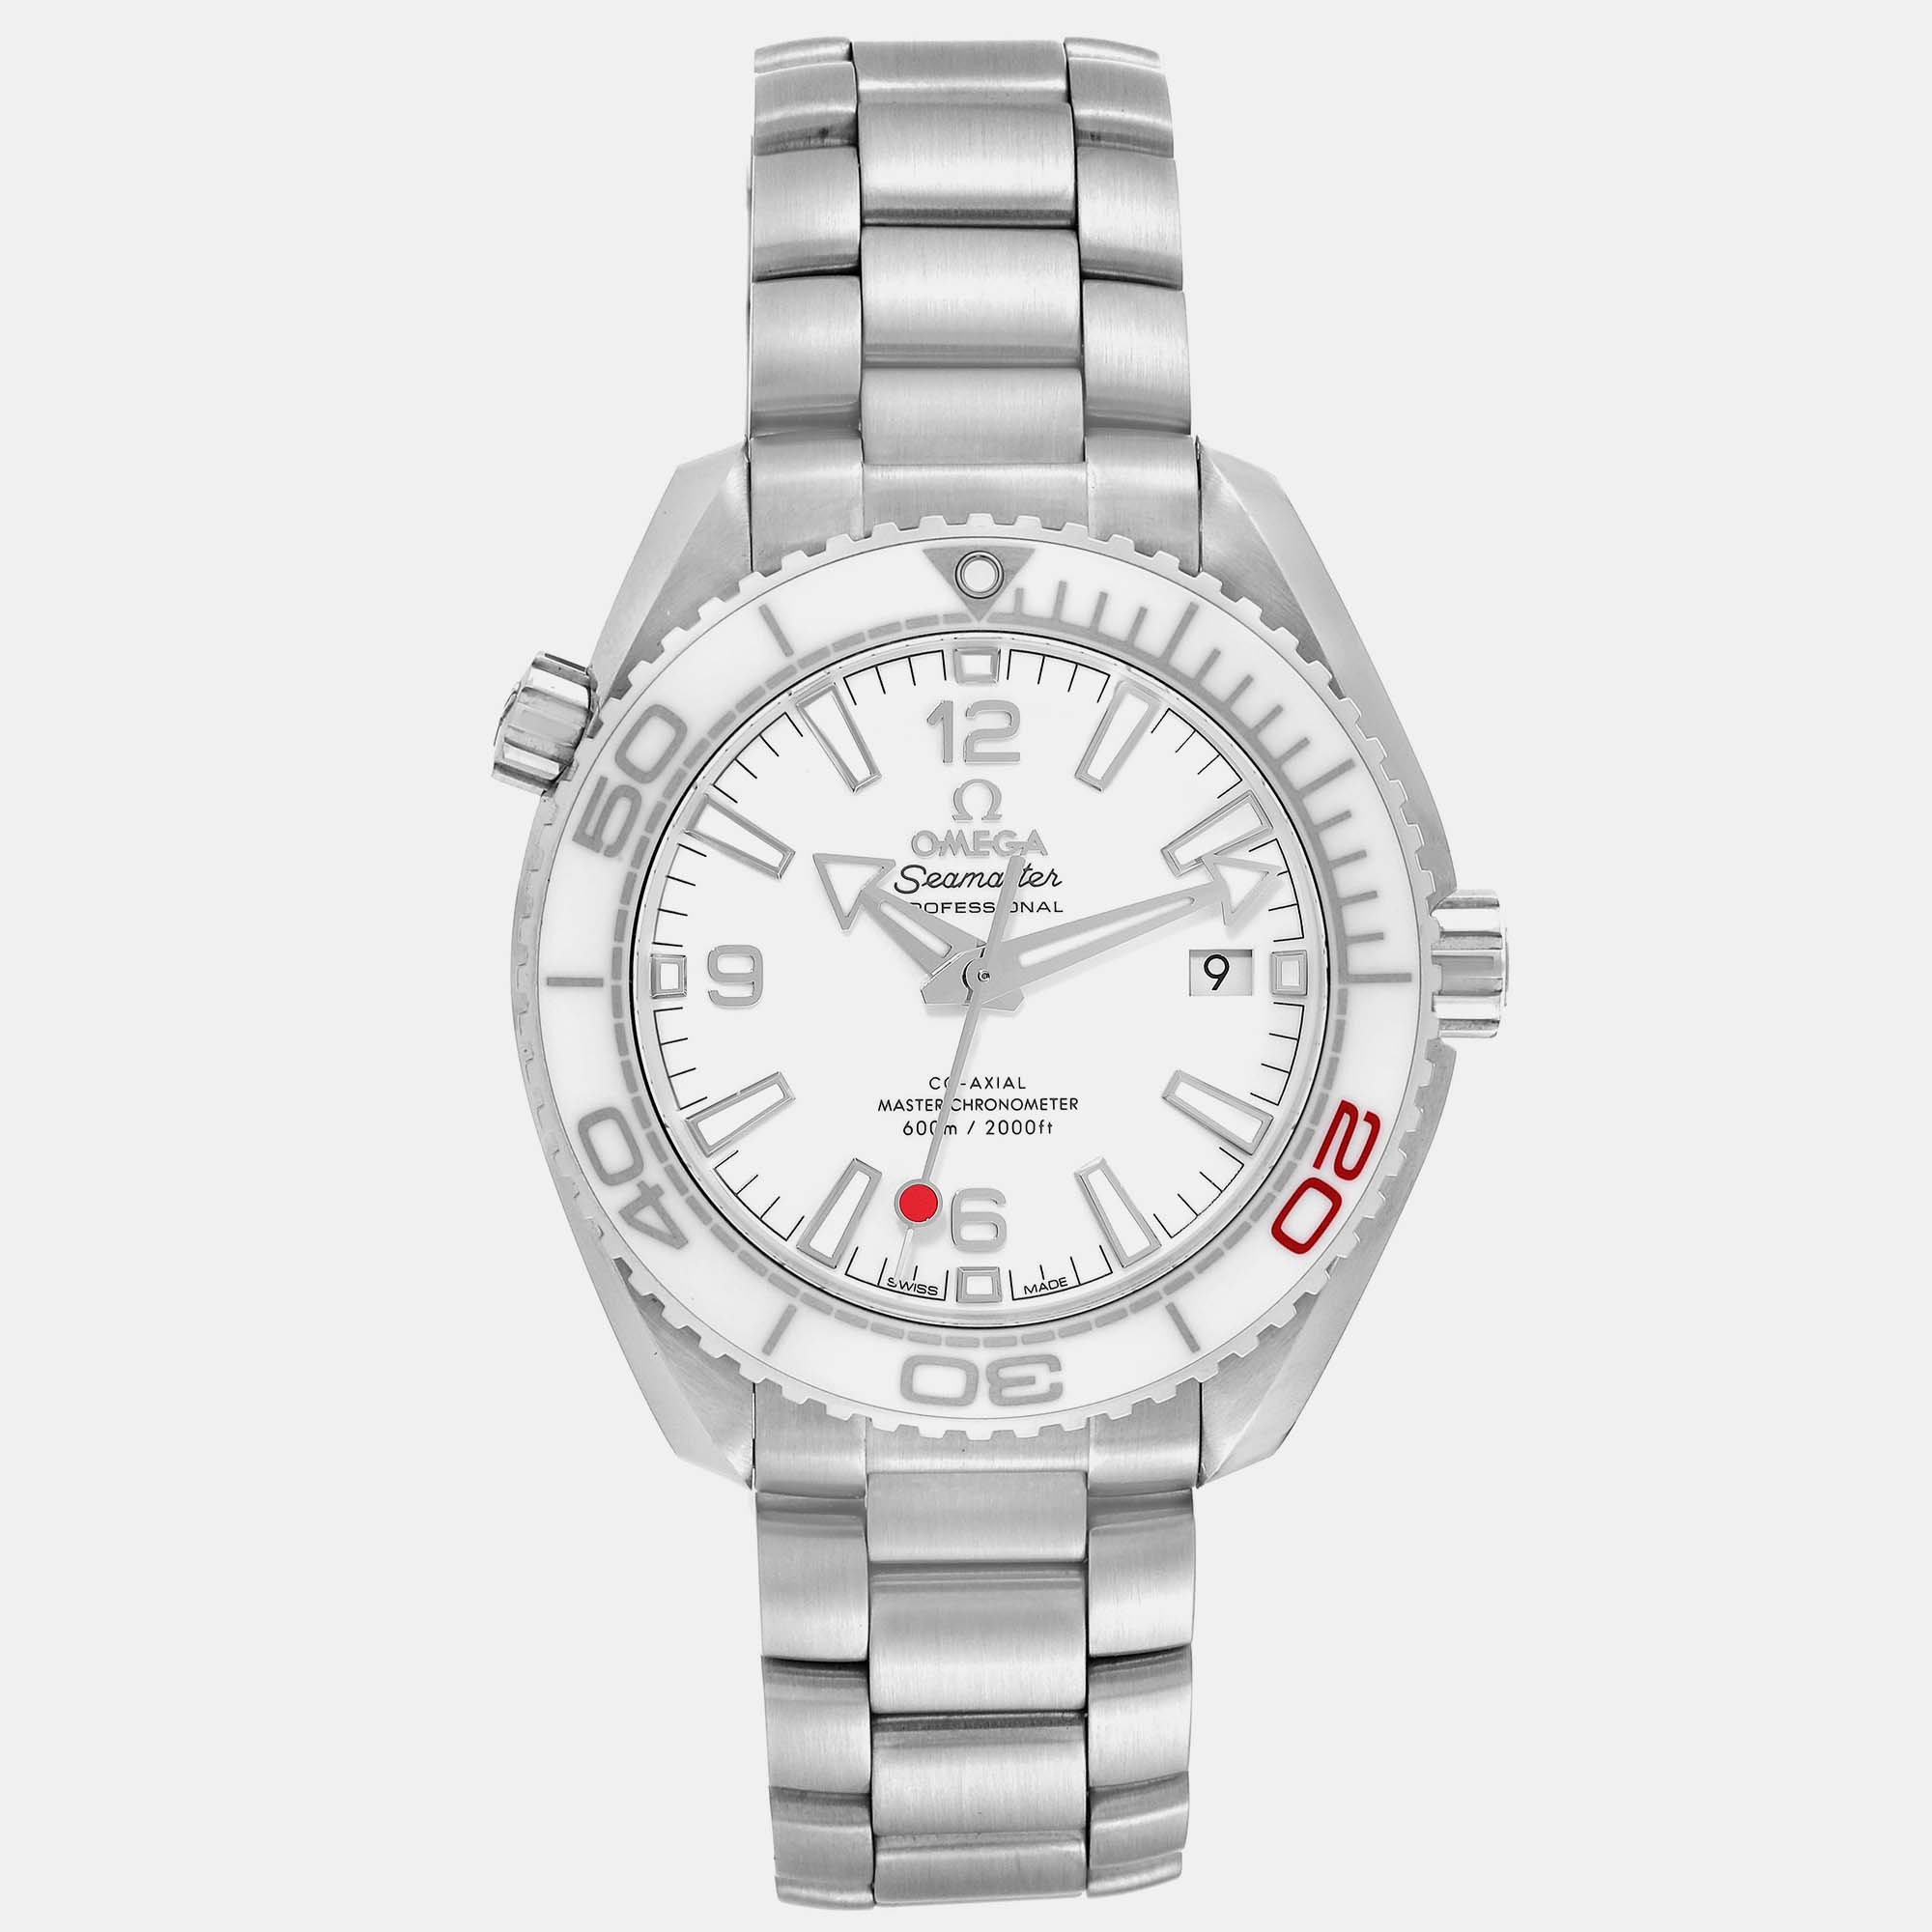 Omega white ceramic stainless steel seamaster 522.33.40.20.04.001 automatic men's wristwatch 39.5 mm